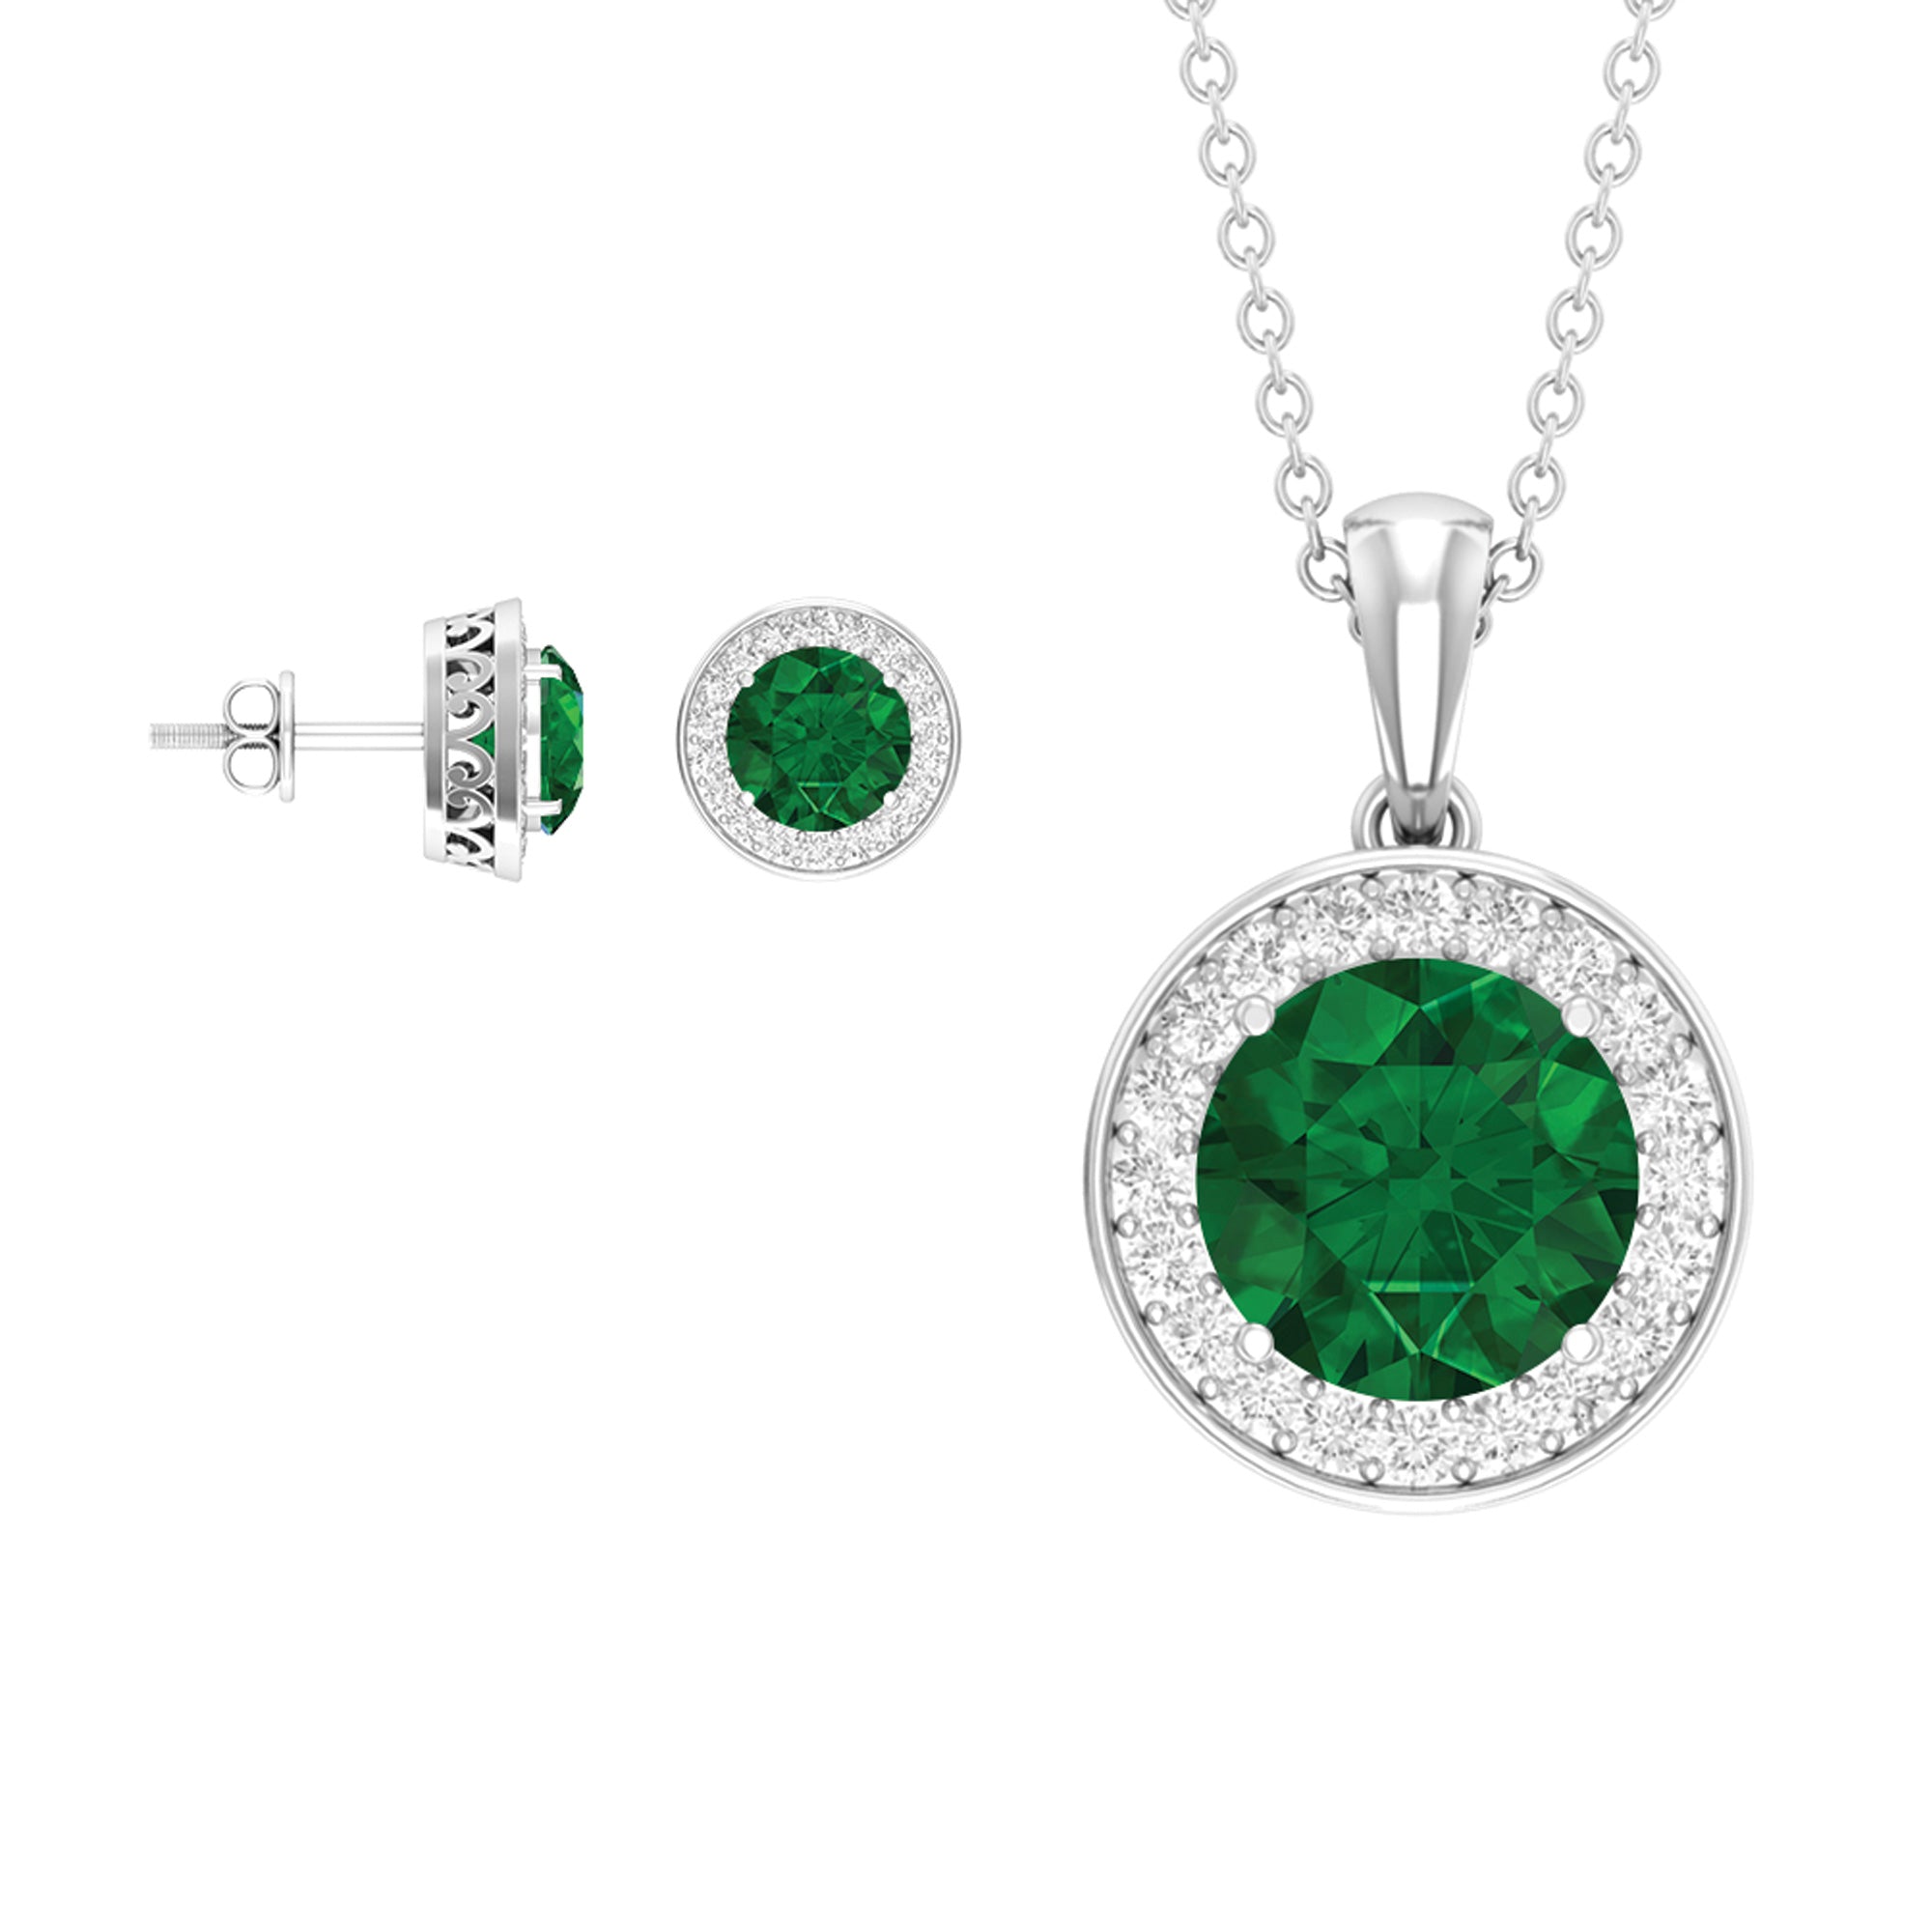 4.75 CT Classic Created Emerald Silver Halo Jewelry Set with Zircon - Rosec Jewels